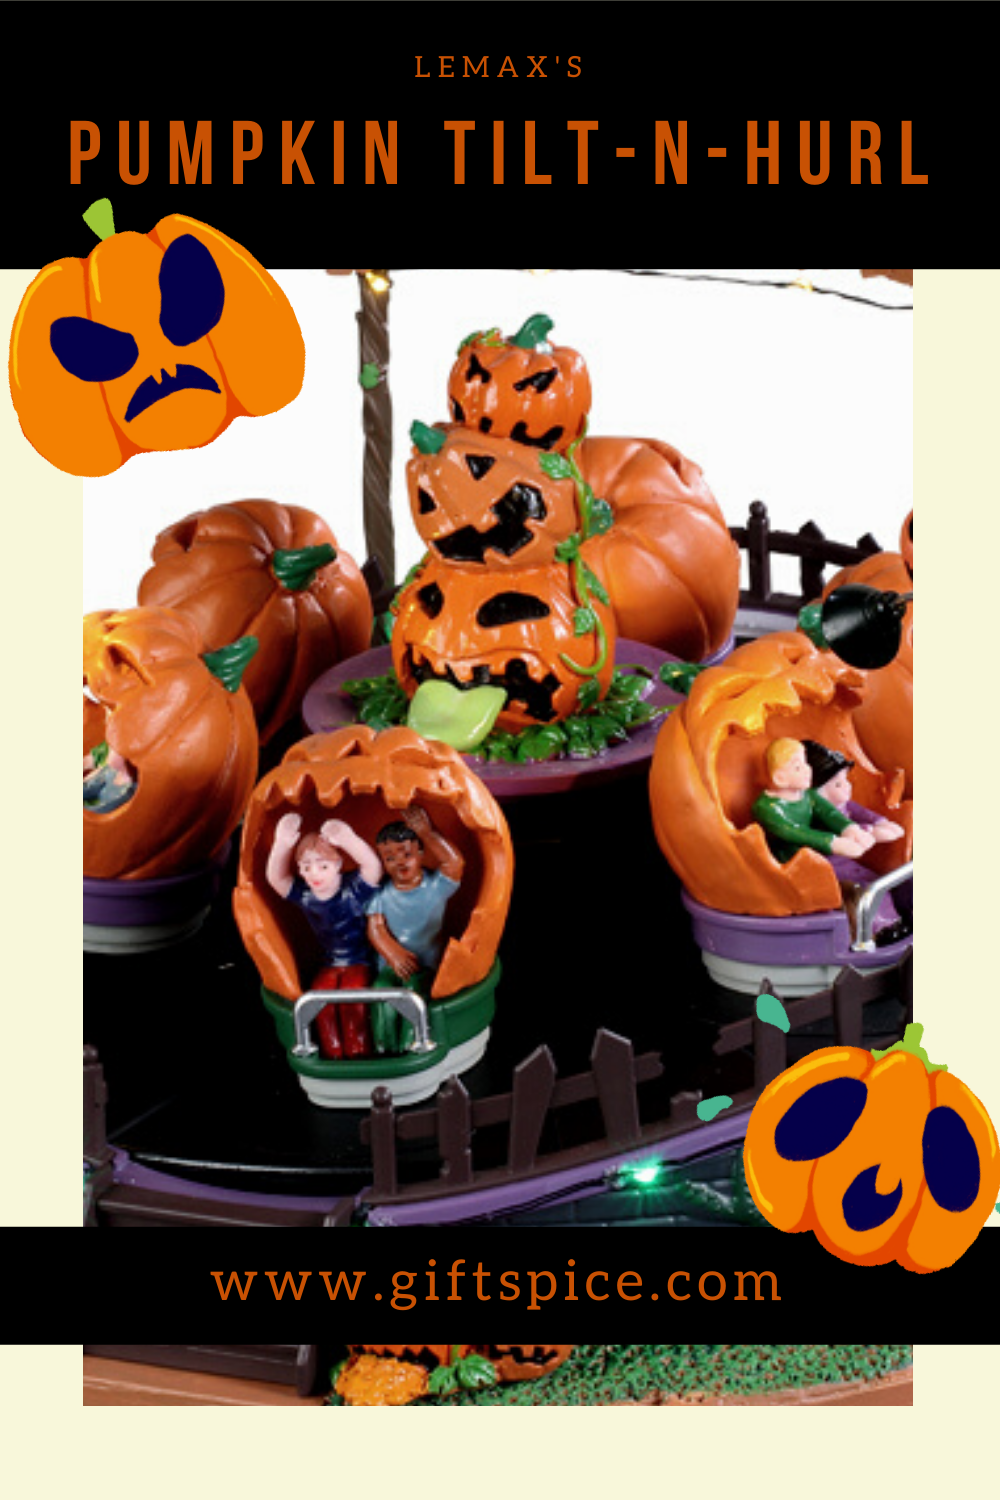 Get ready to spin with Lemax's Pumpkin Tilt-N-Hurl!